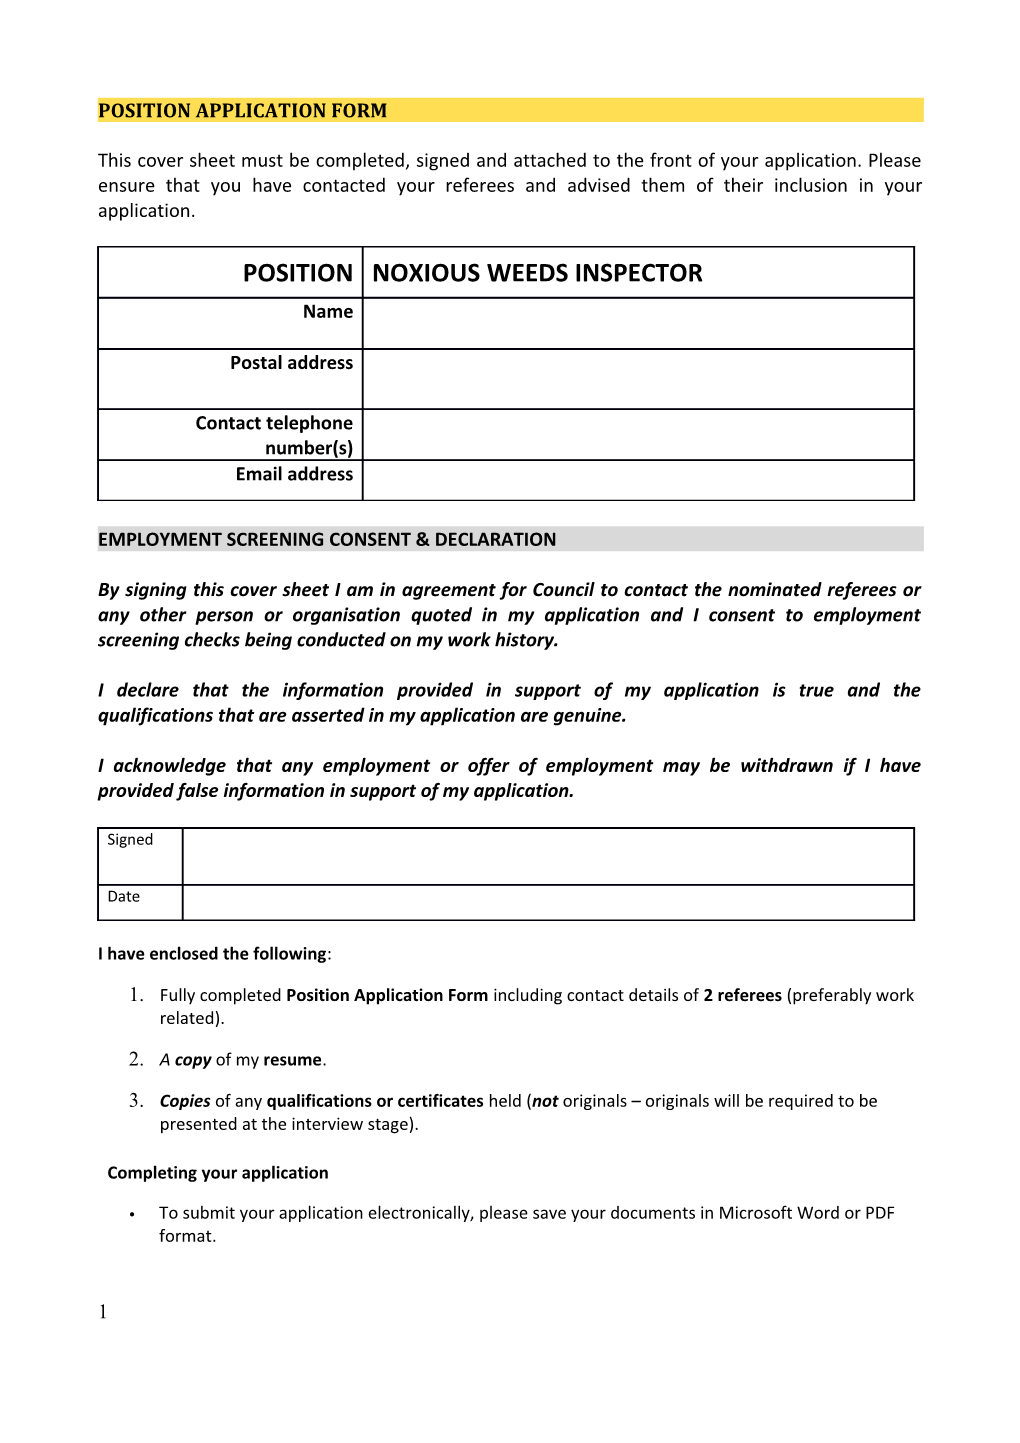 Position Application Form